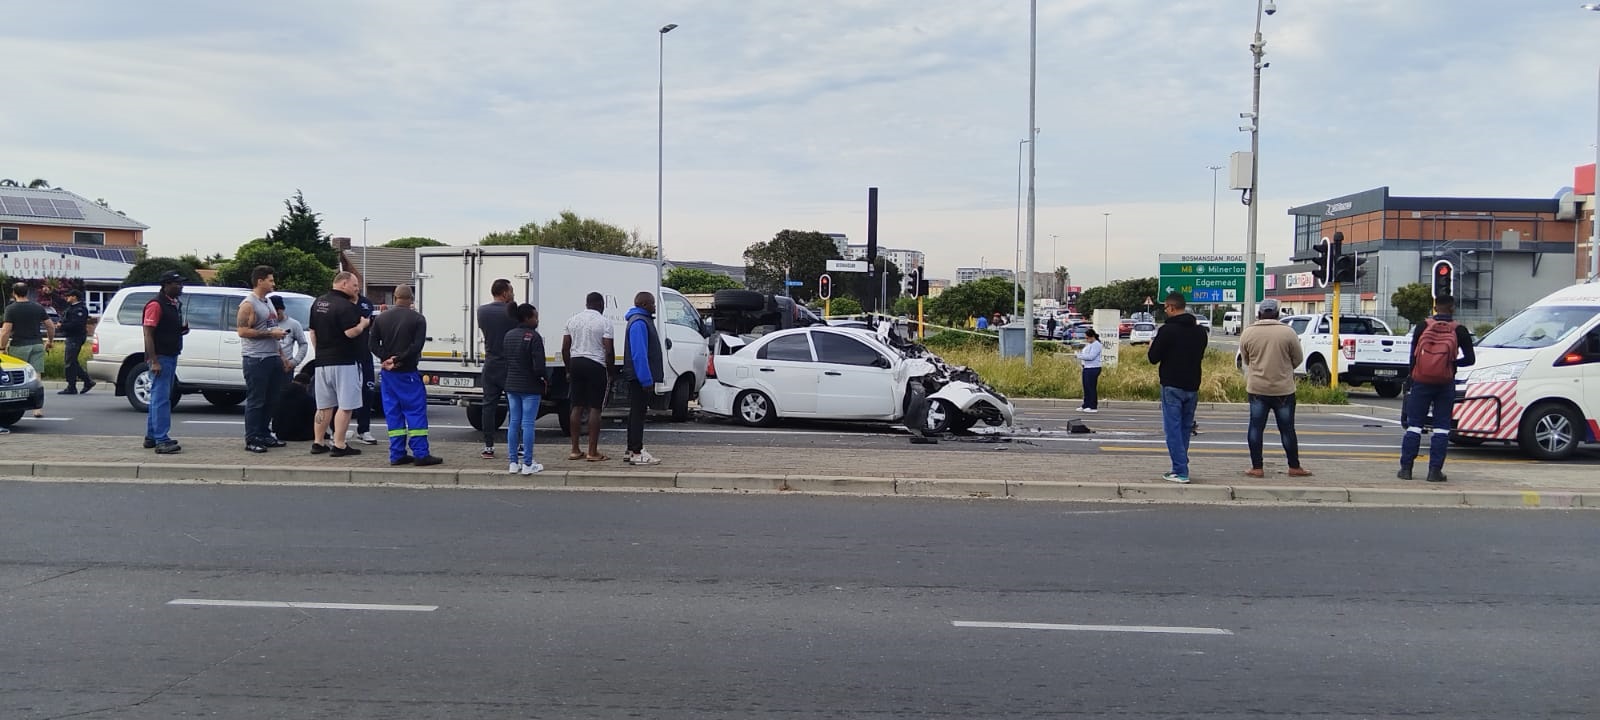 'Shooting' incident in Milnerton results in major accident